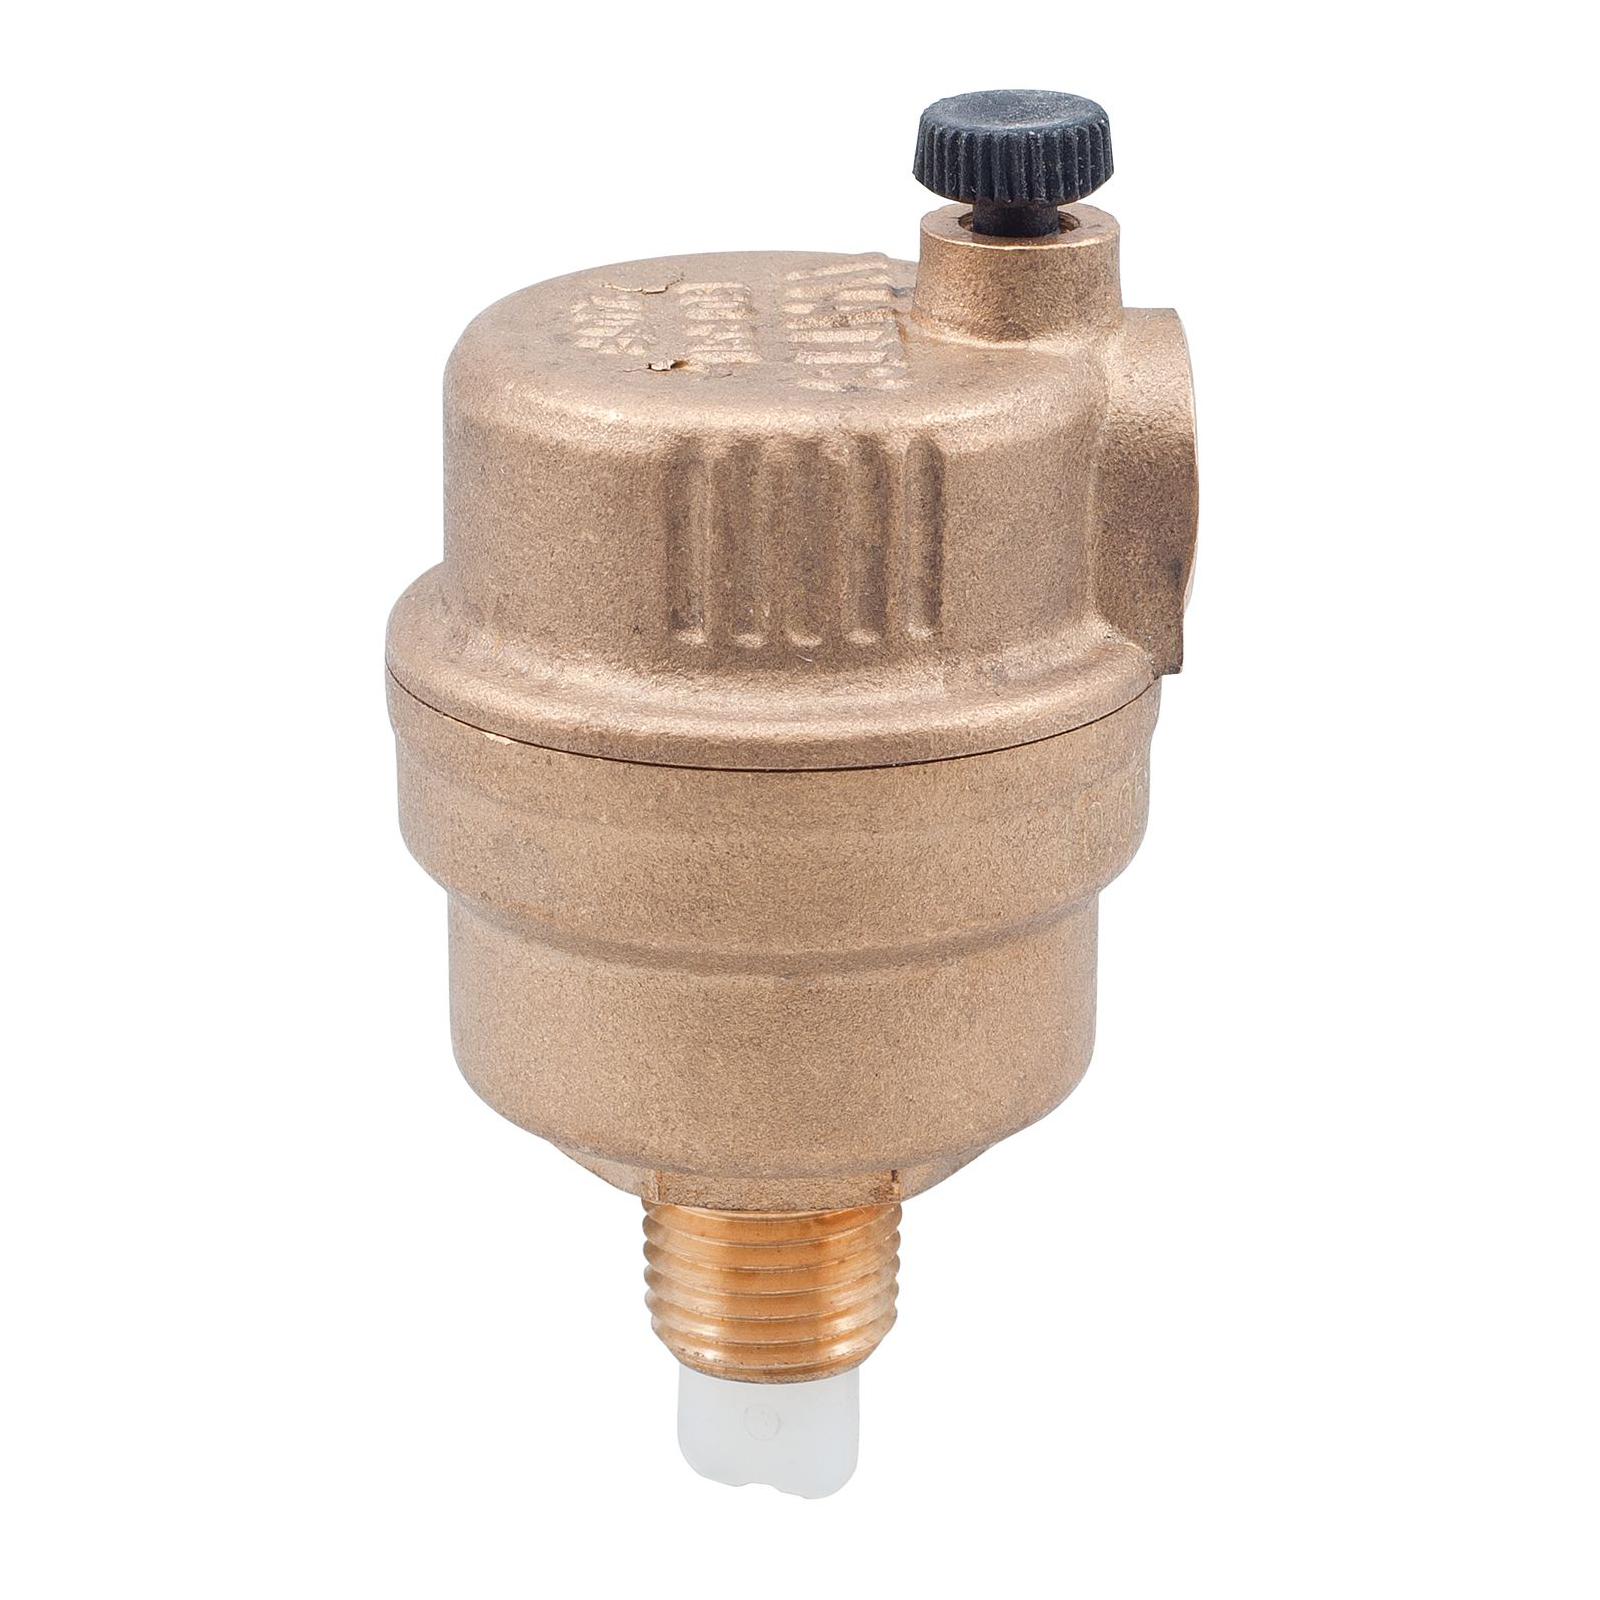 Aquifer Distribution WATTS 0590715 FV-4M1 Automatic Air Vent Valve, 1/8  in Nominal, 1.45 to 150 psi Pressure, Brass Body, Import